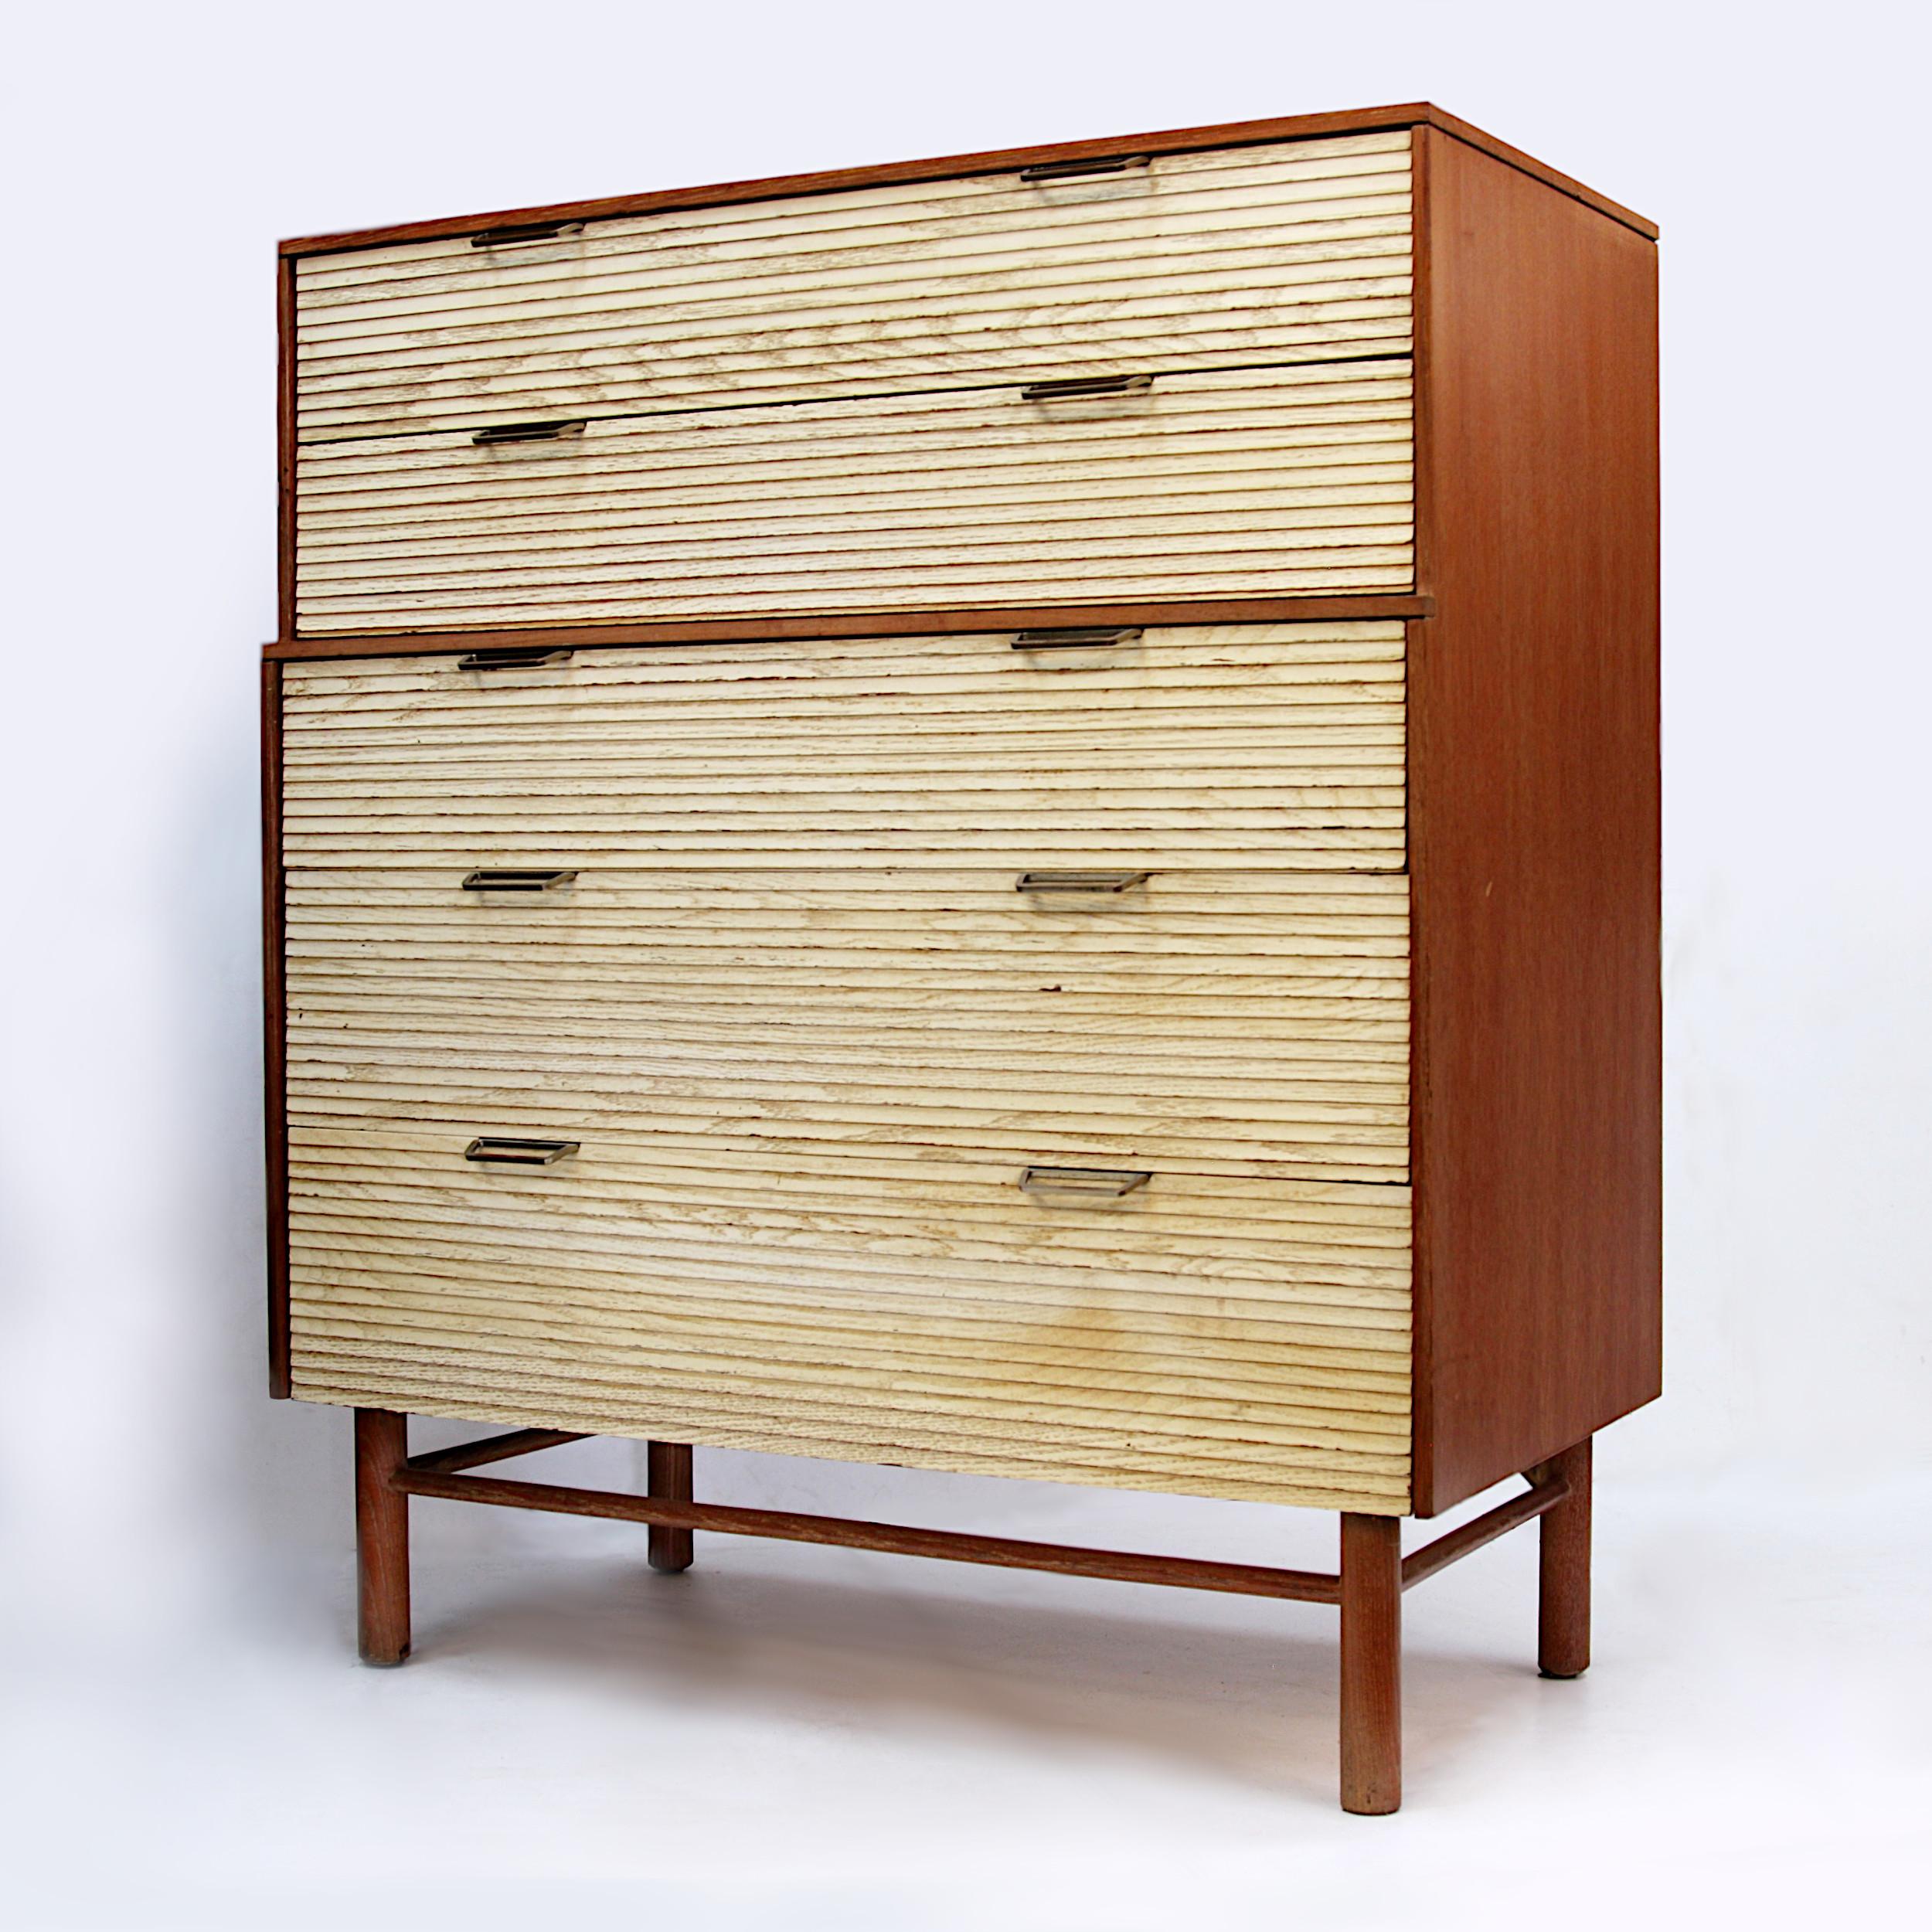 Very nice, original piece from one of the most iconic Industrial designers of the 20th century! Dresser features cerused oak case, 5 louvered-front white-washed drawers, and nickel-plated hardware. White drawer fronts contrast beautifully with